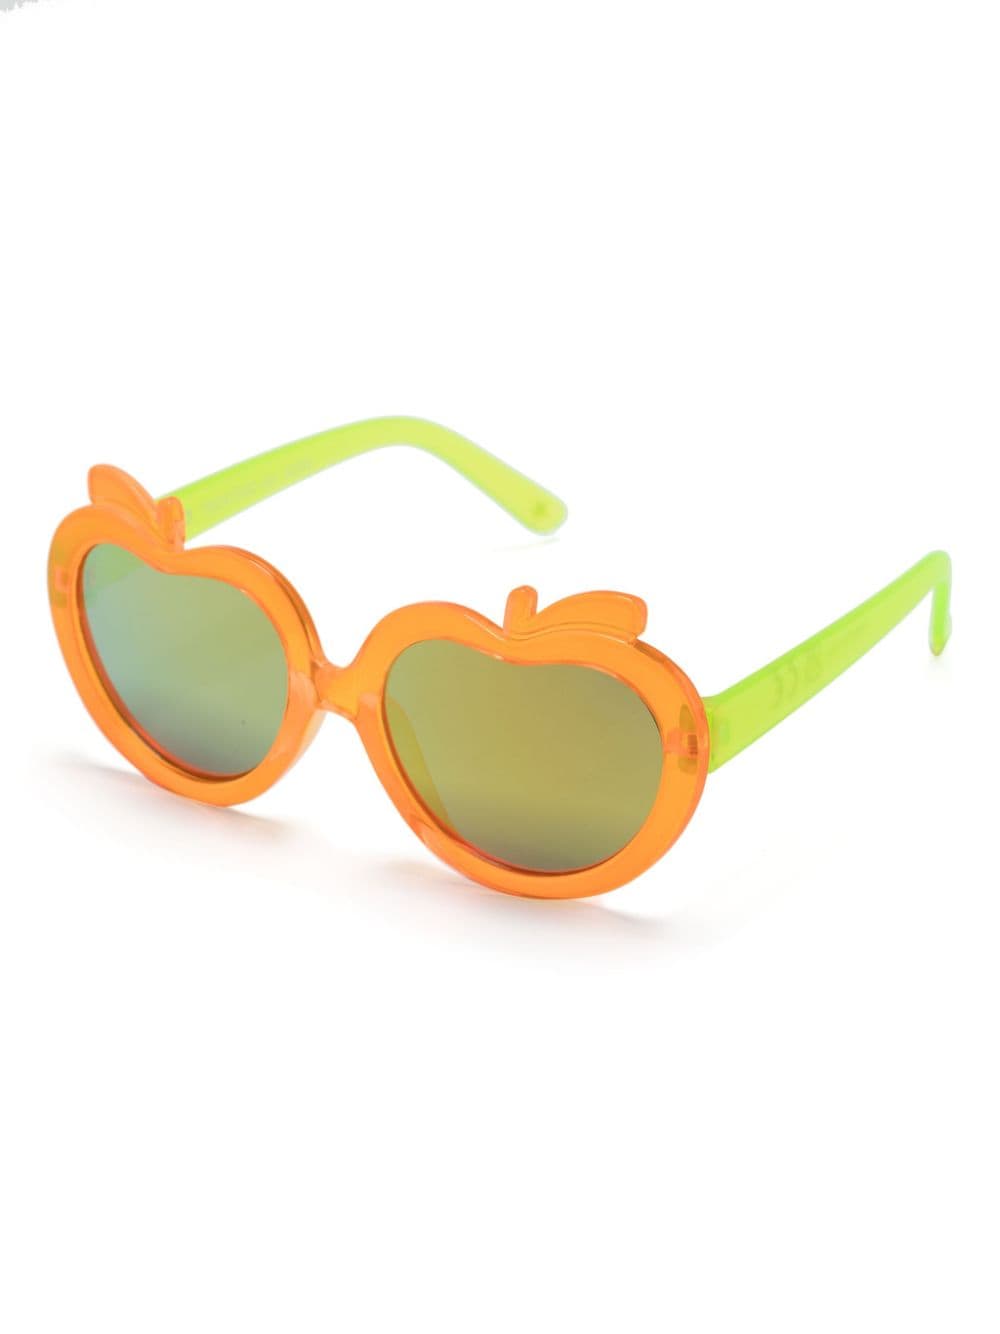 Asymmetrical sunglasses with tinted lenses